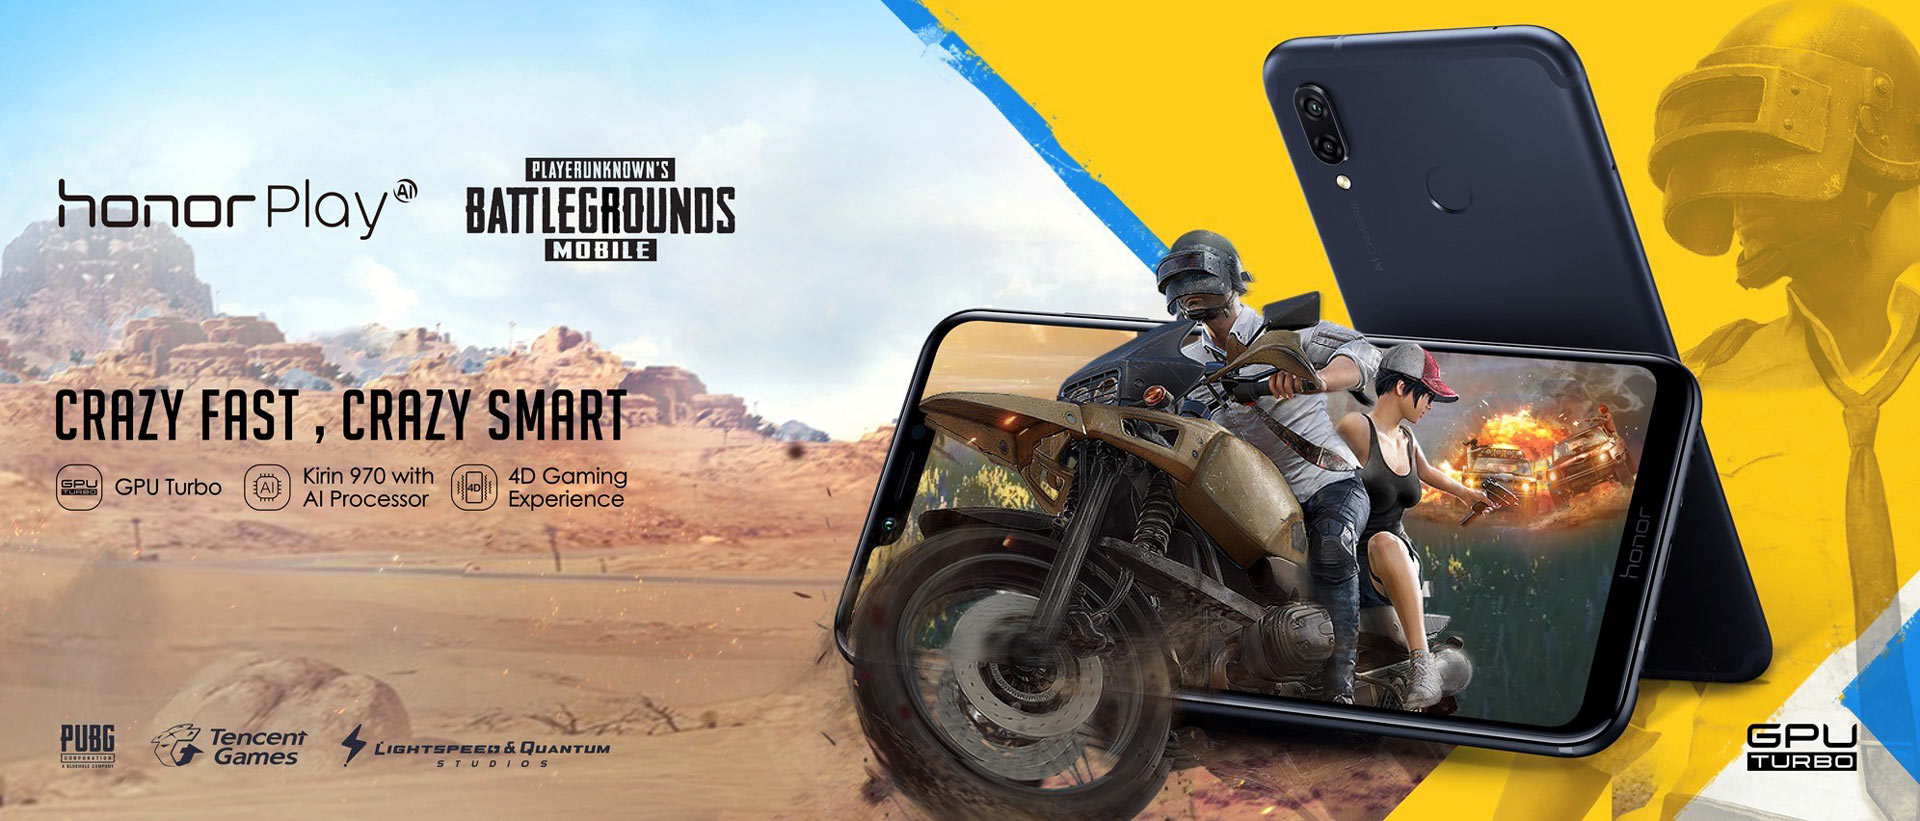 honor play announces joint strategic partnership with top mobile games pubg mobile and asphalt 9 legends